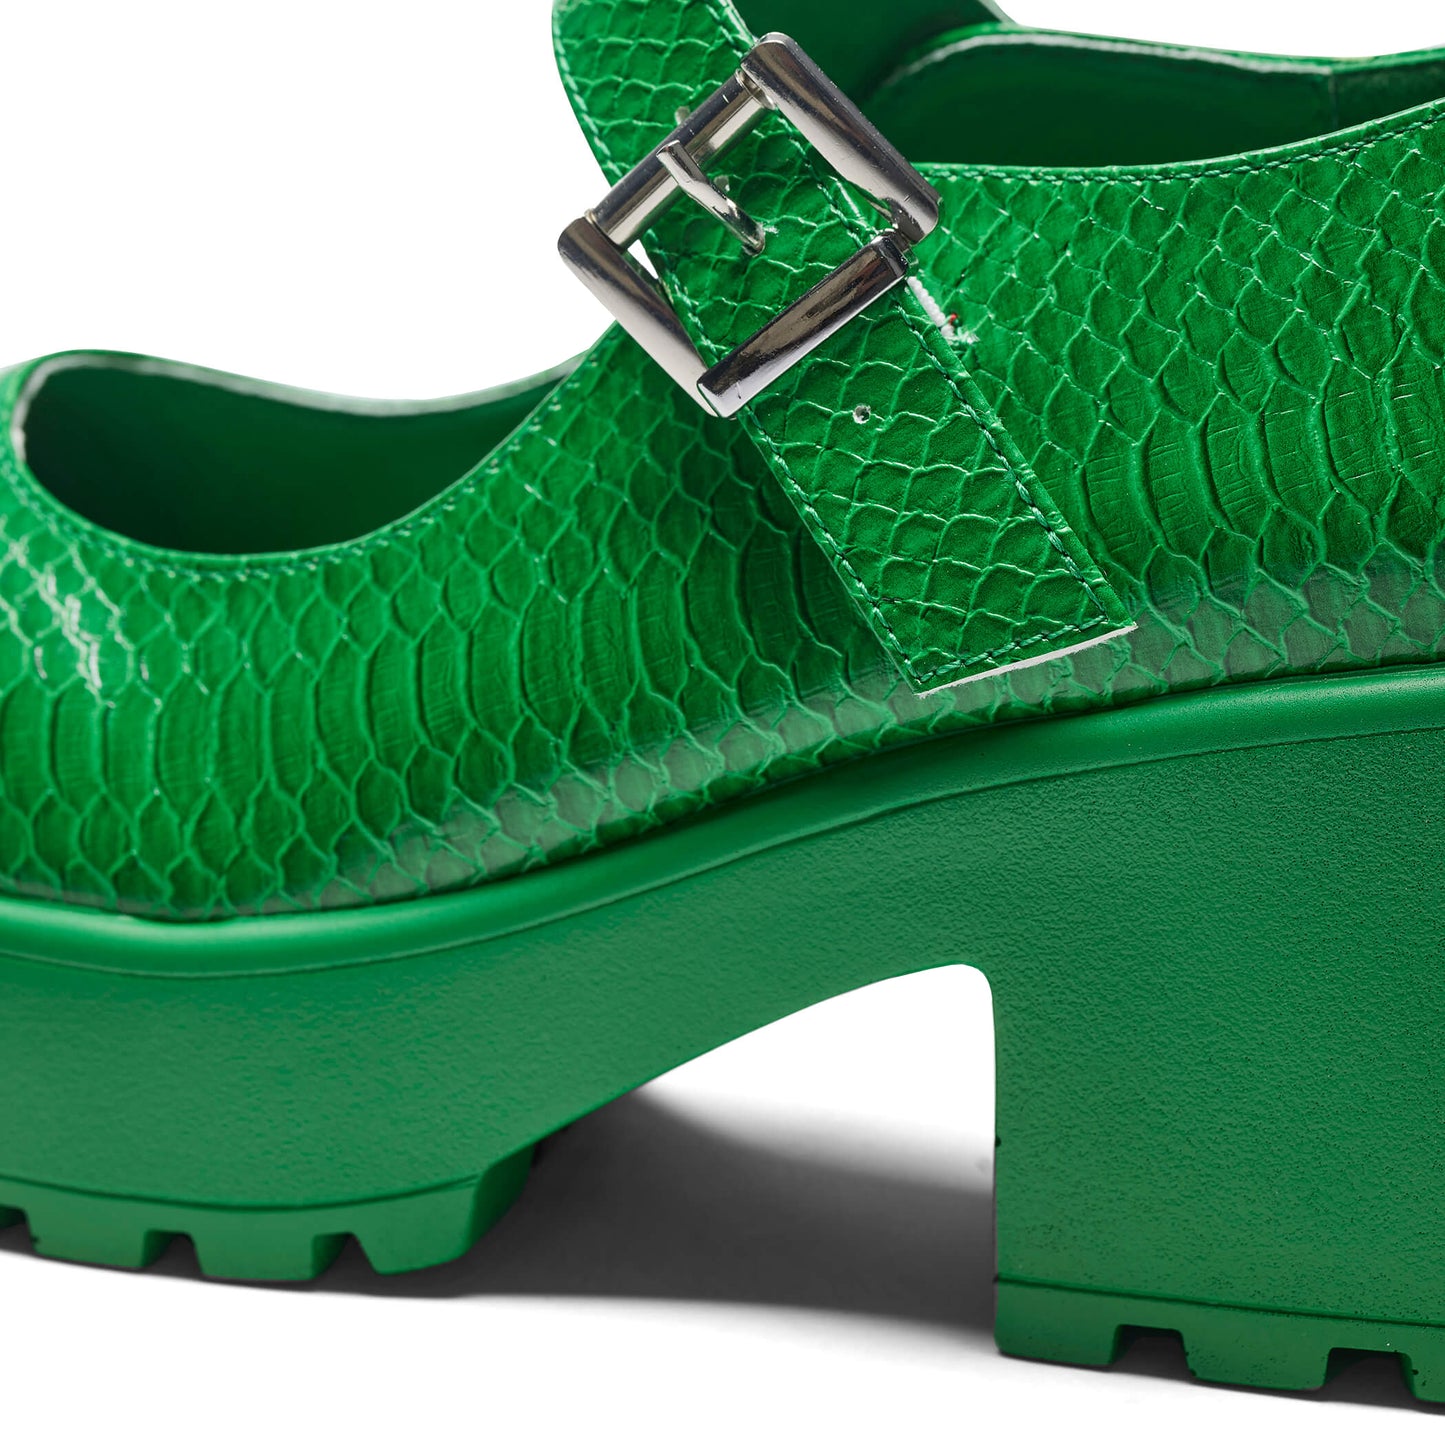 Tira Mary Janes Shoes 'Sassy Snake Edition' - Green - KOI Footwear - Buckle Detail